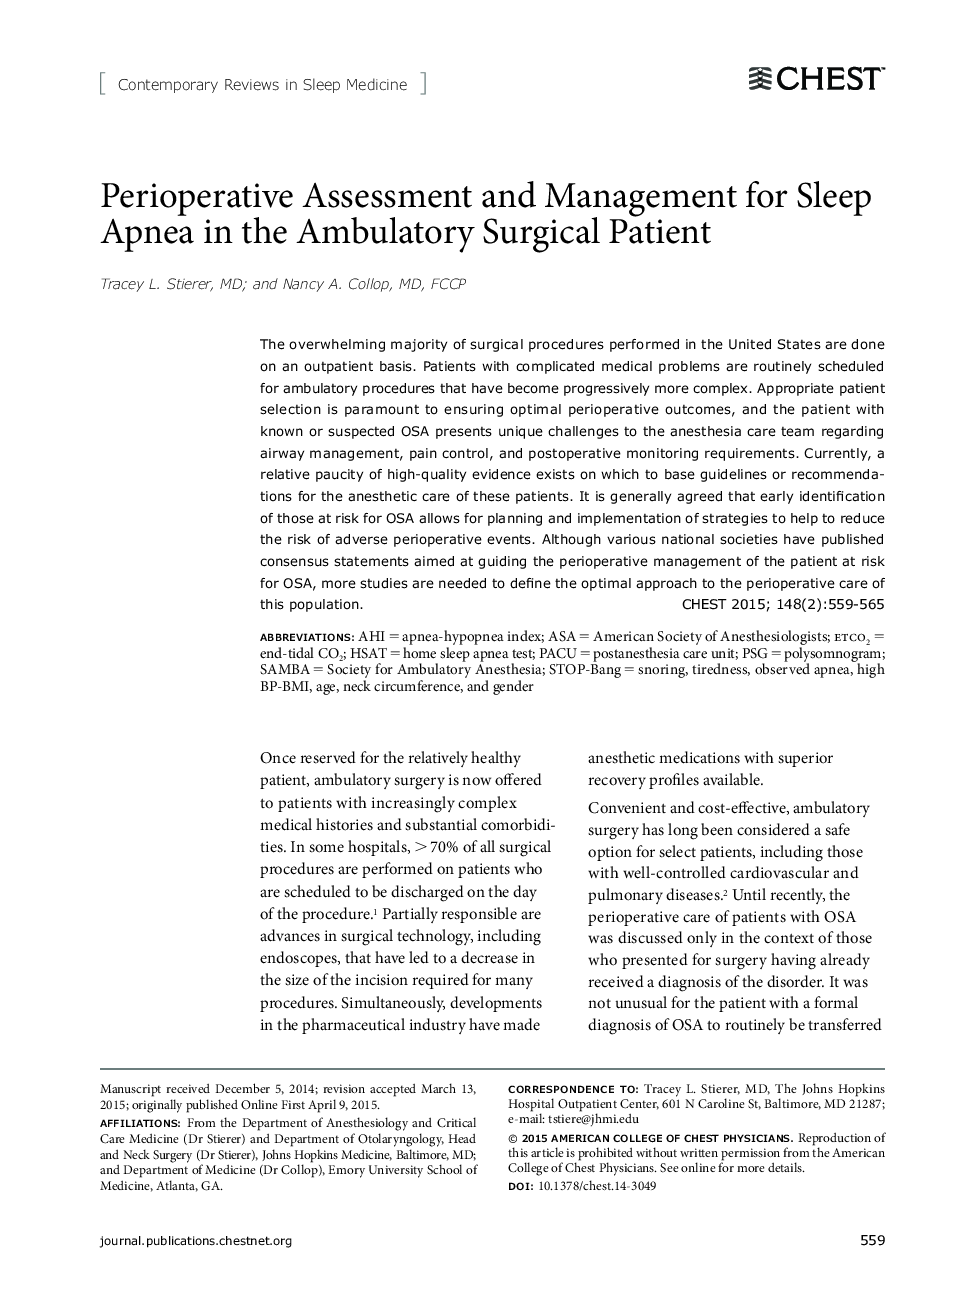 Perioperative Assessment and Management for Sleep Apnea in the Ambulatory Surgical Patient